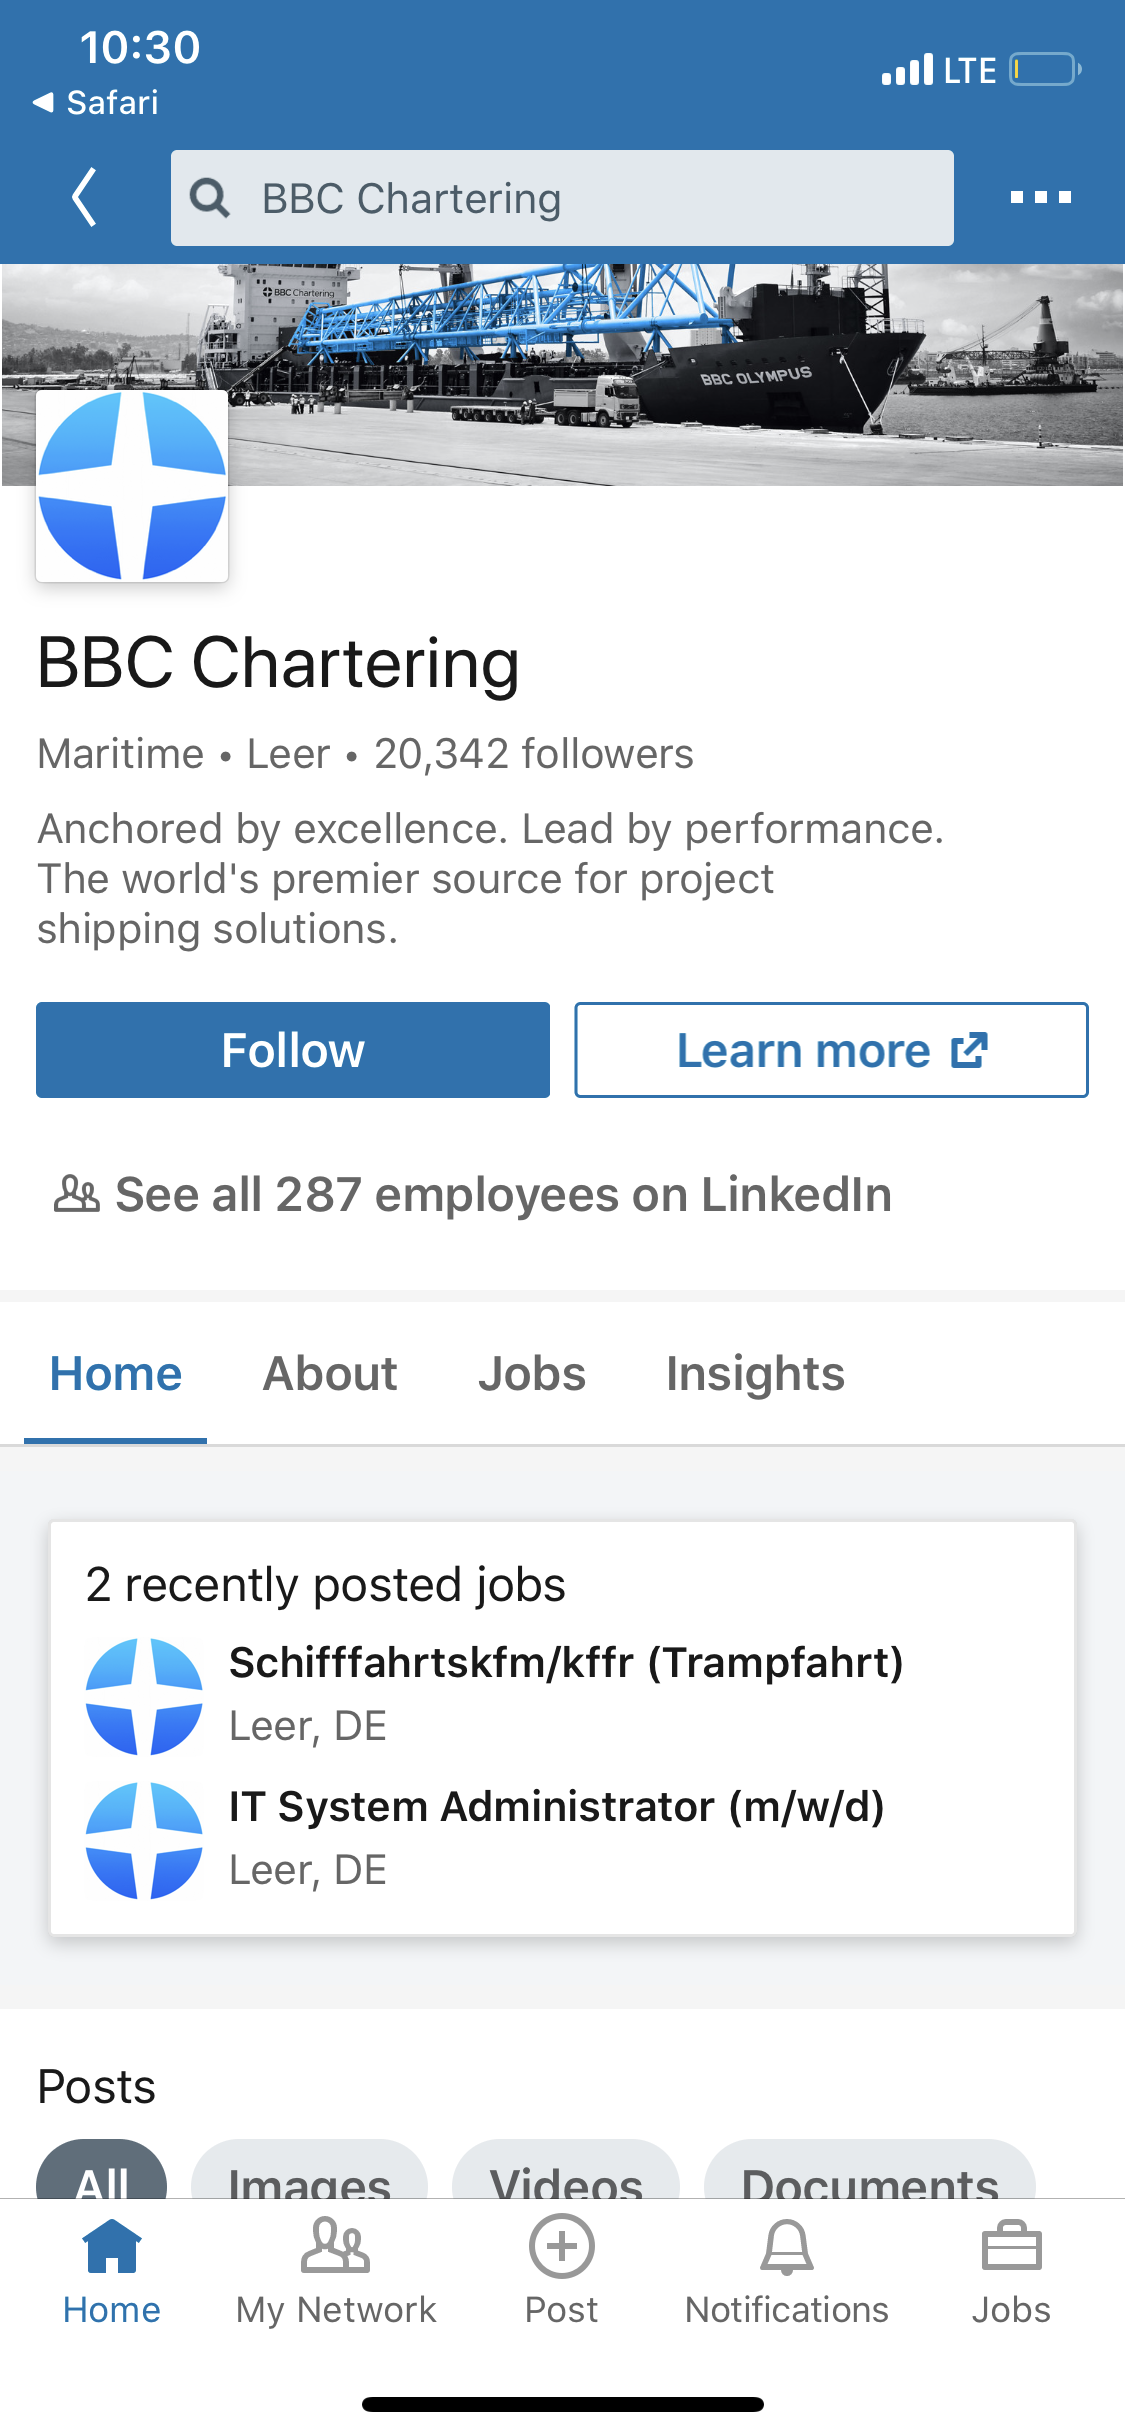  THE REAL BBC CHARTERING, FORTUNE 500 COMPANY.PNG